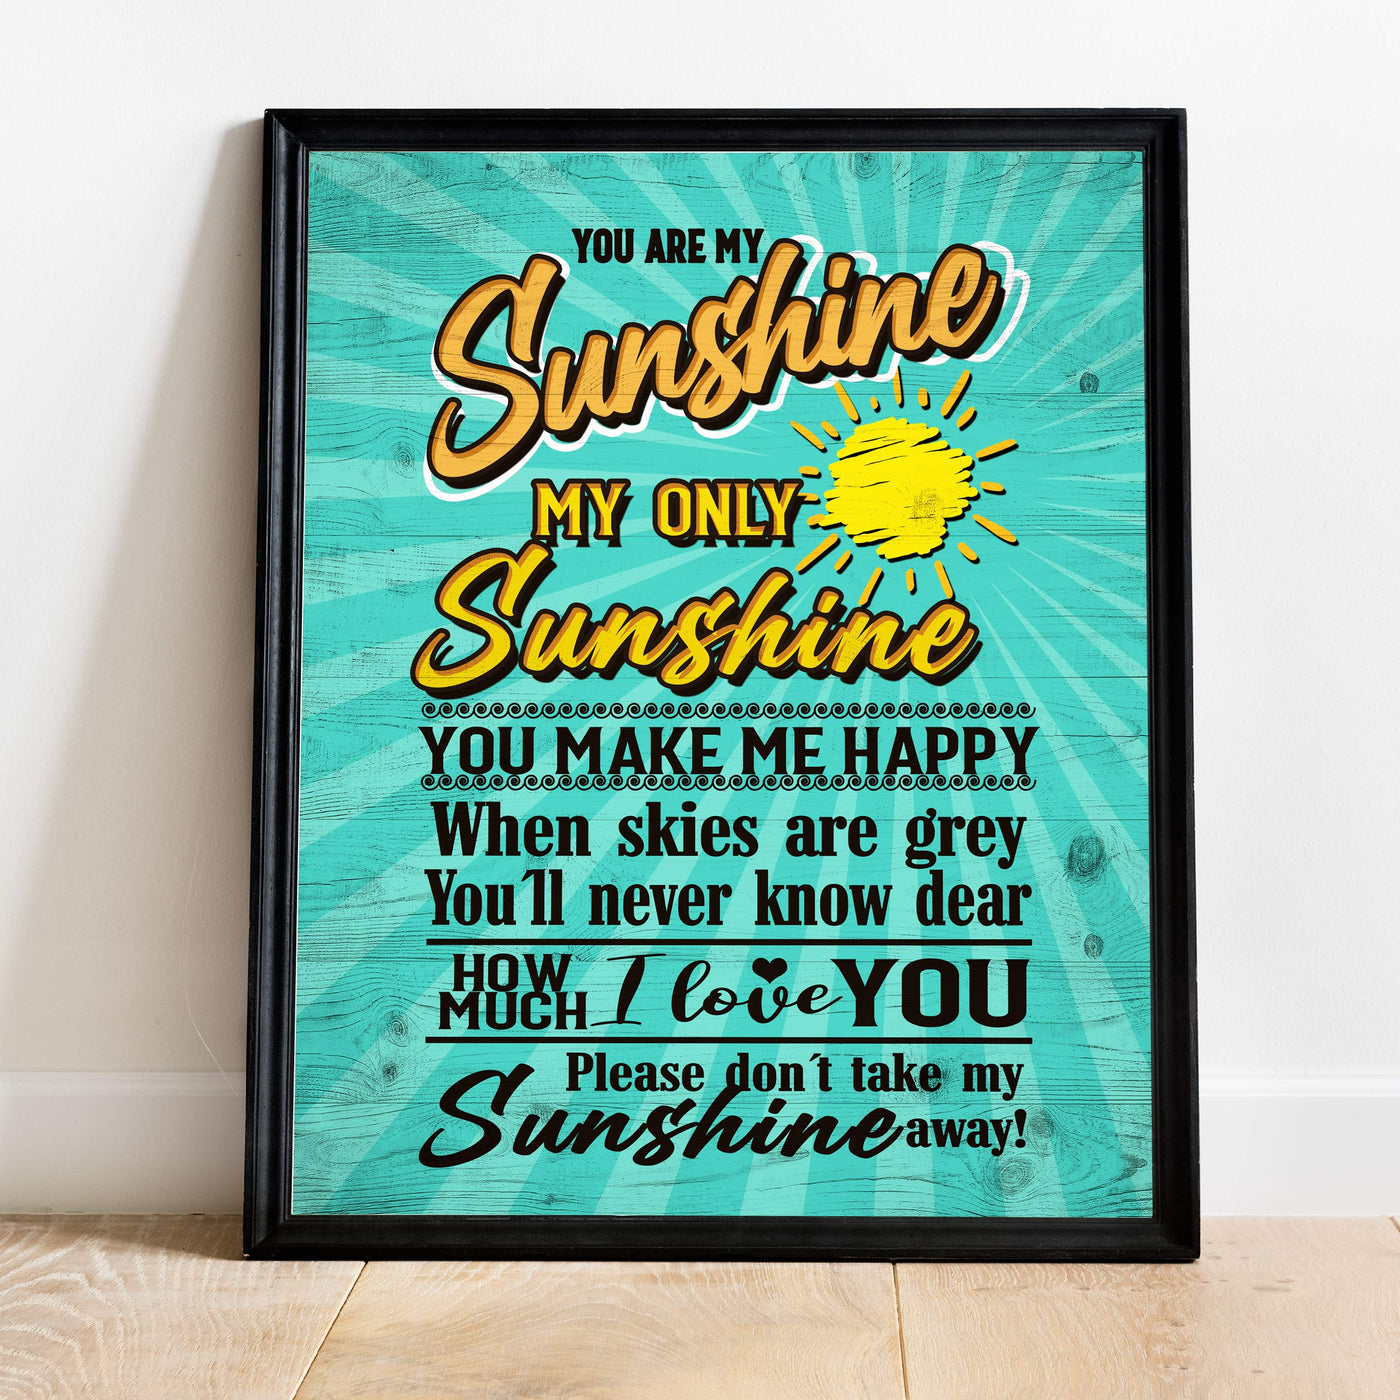 You Are My Sunshine Fun Beach Themed Song Art -11 x 14" Rustic Sun Print w/Distressed Wood Design -Ready to Frame. Perfect Home-Nursery-Beach House-Ocean Theme Decor! Printed on Photo Paper.